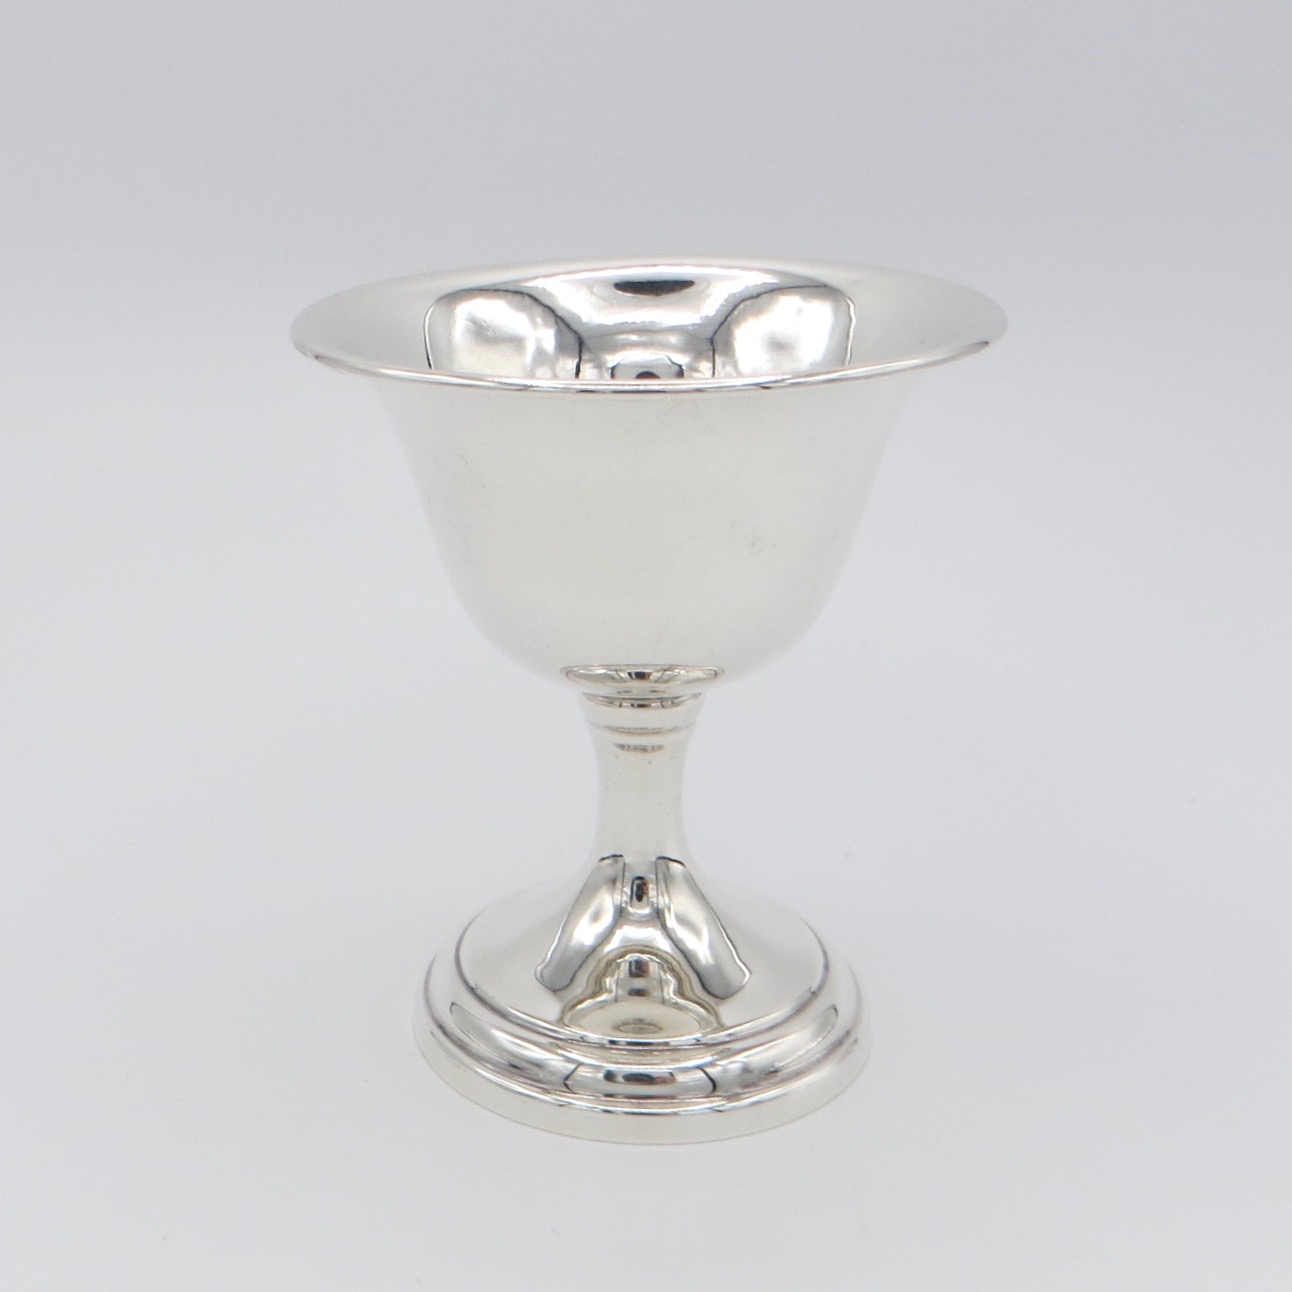 Pair of Sterling Silver Goblets